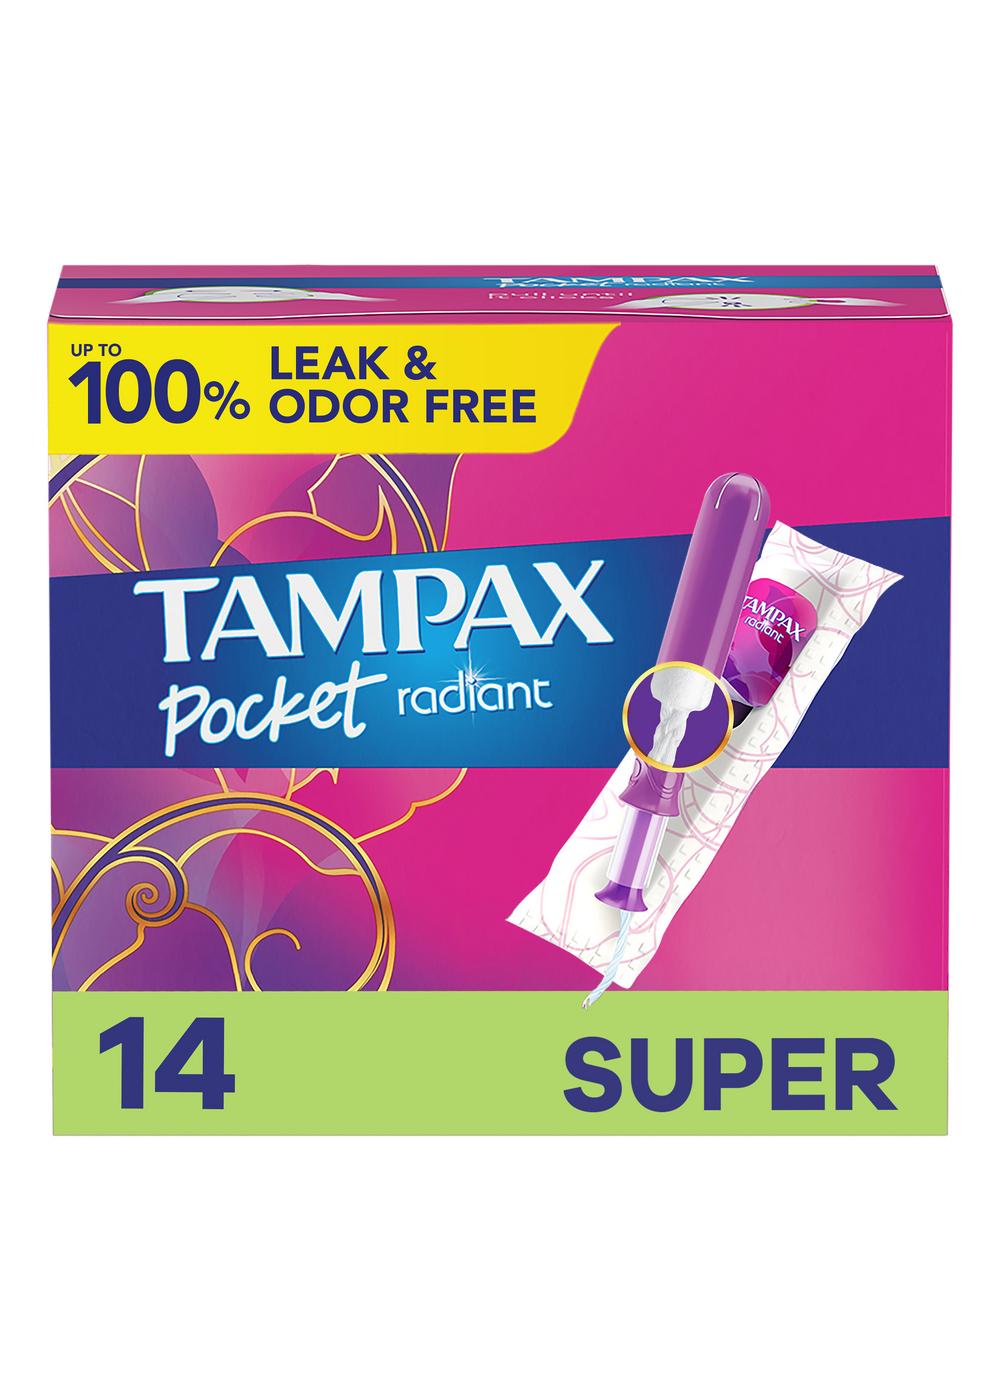 Tampax Radiant Pocket Compact Tampons - Super; image 6 of 9